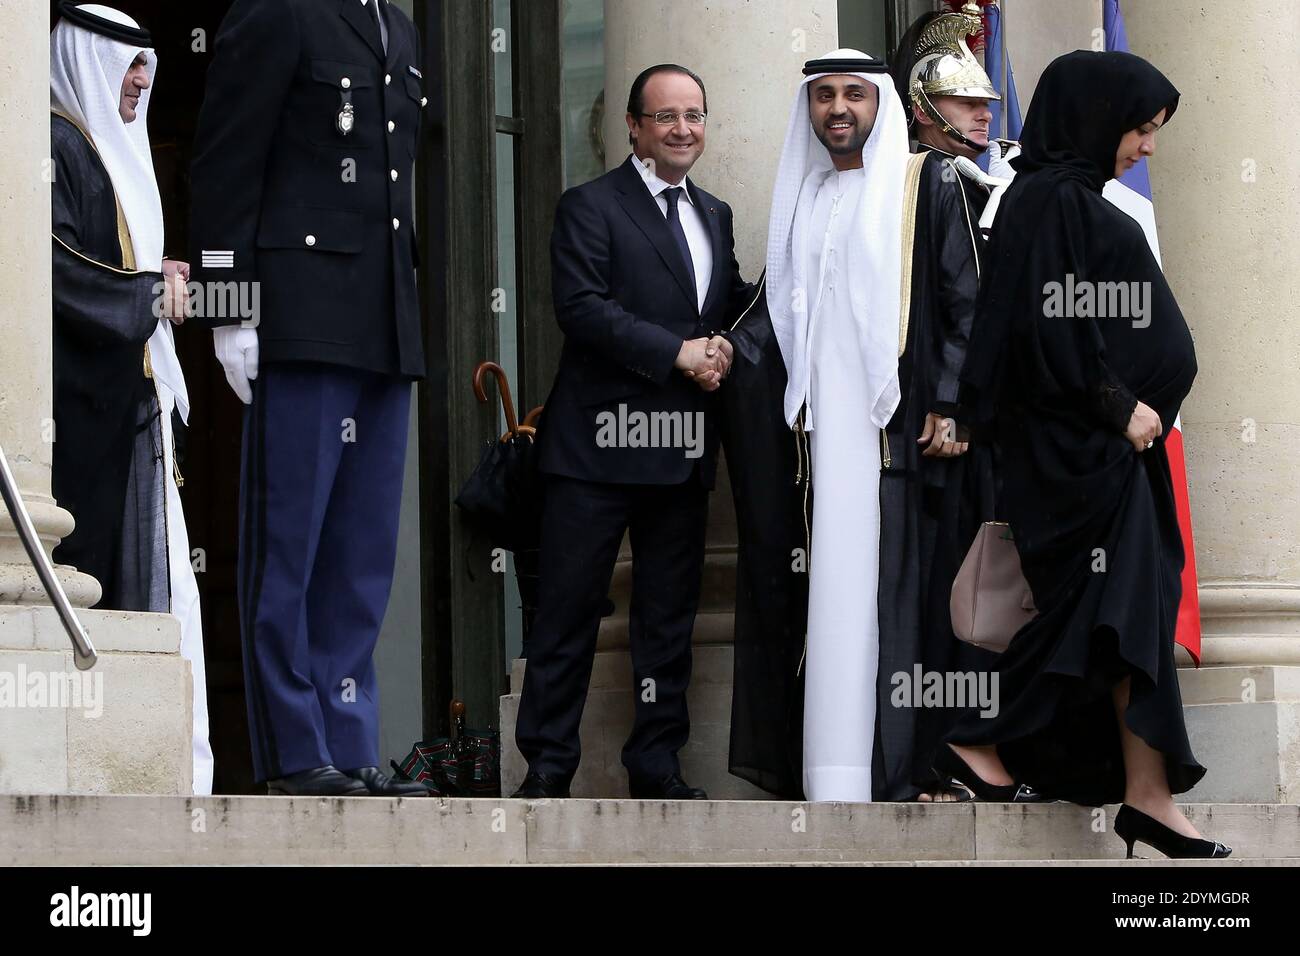 French President Francois Hollande shakes hands with the delegation of Dubai ruler Sheikh Mohammed bin Rashid al-Maktoum after a meeting at the Elysee Palace, in Paris, France on June 13, 2013. Photo by Stephane Lemouton/ABACAPRESS.COM Stock Photo